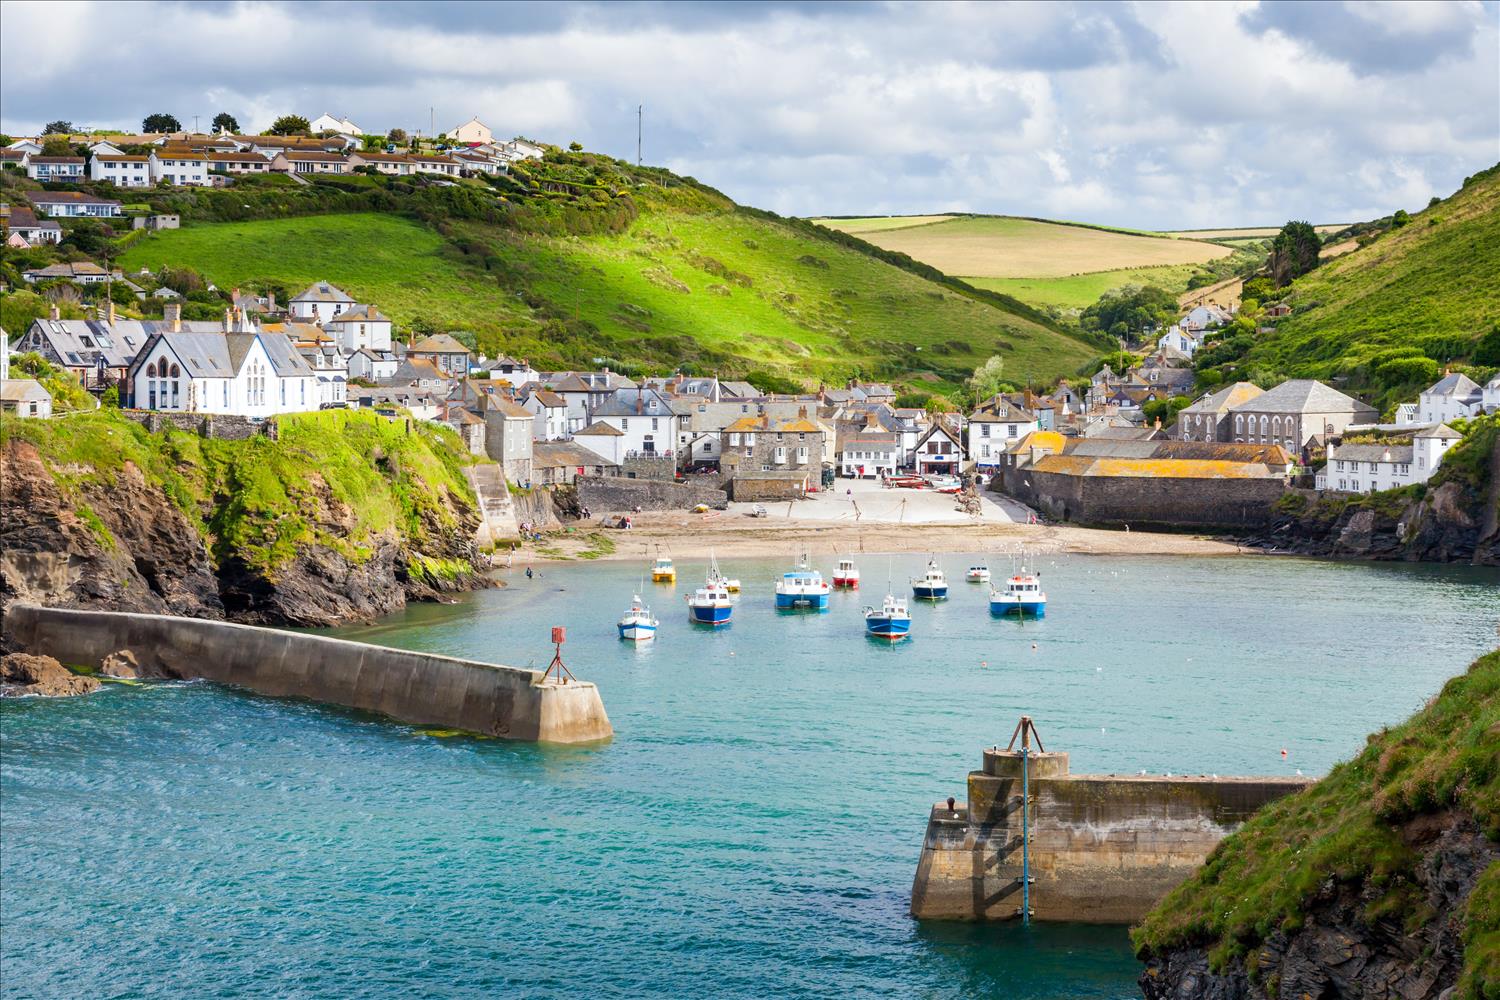 The tide is in at Port Isaac, home to ITV's Doc Martin, with boats floating in the harbour and the town's white stone houses rising up the hillside